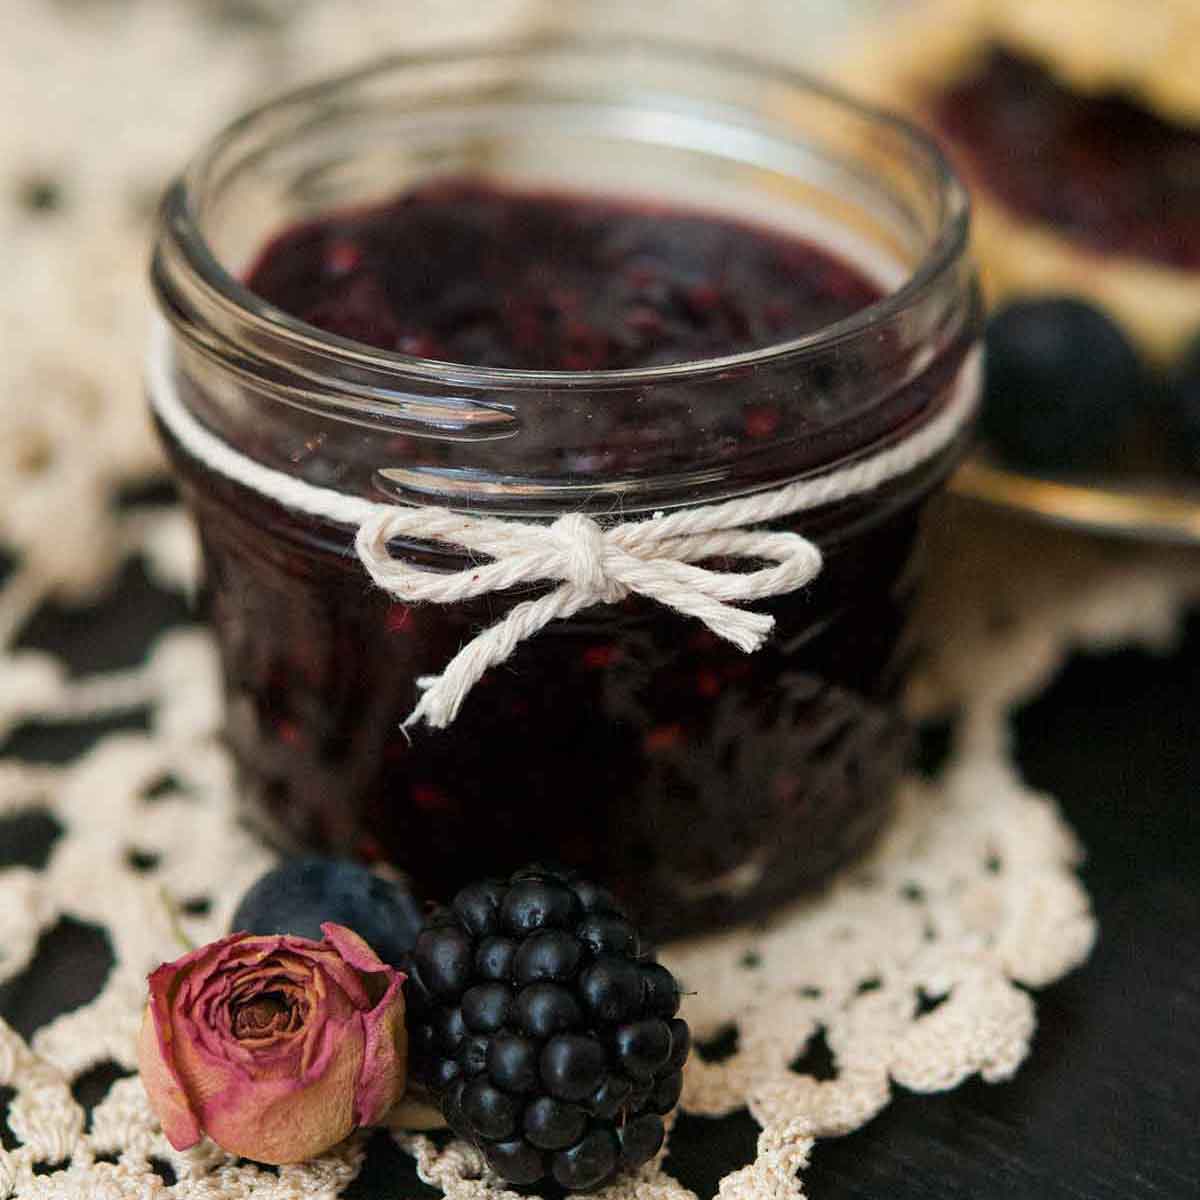 A jar of jam tied with a string with a sprig of lavender tucked into the string with a lace table cloth in the background.